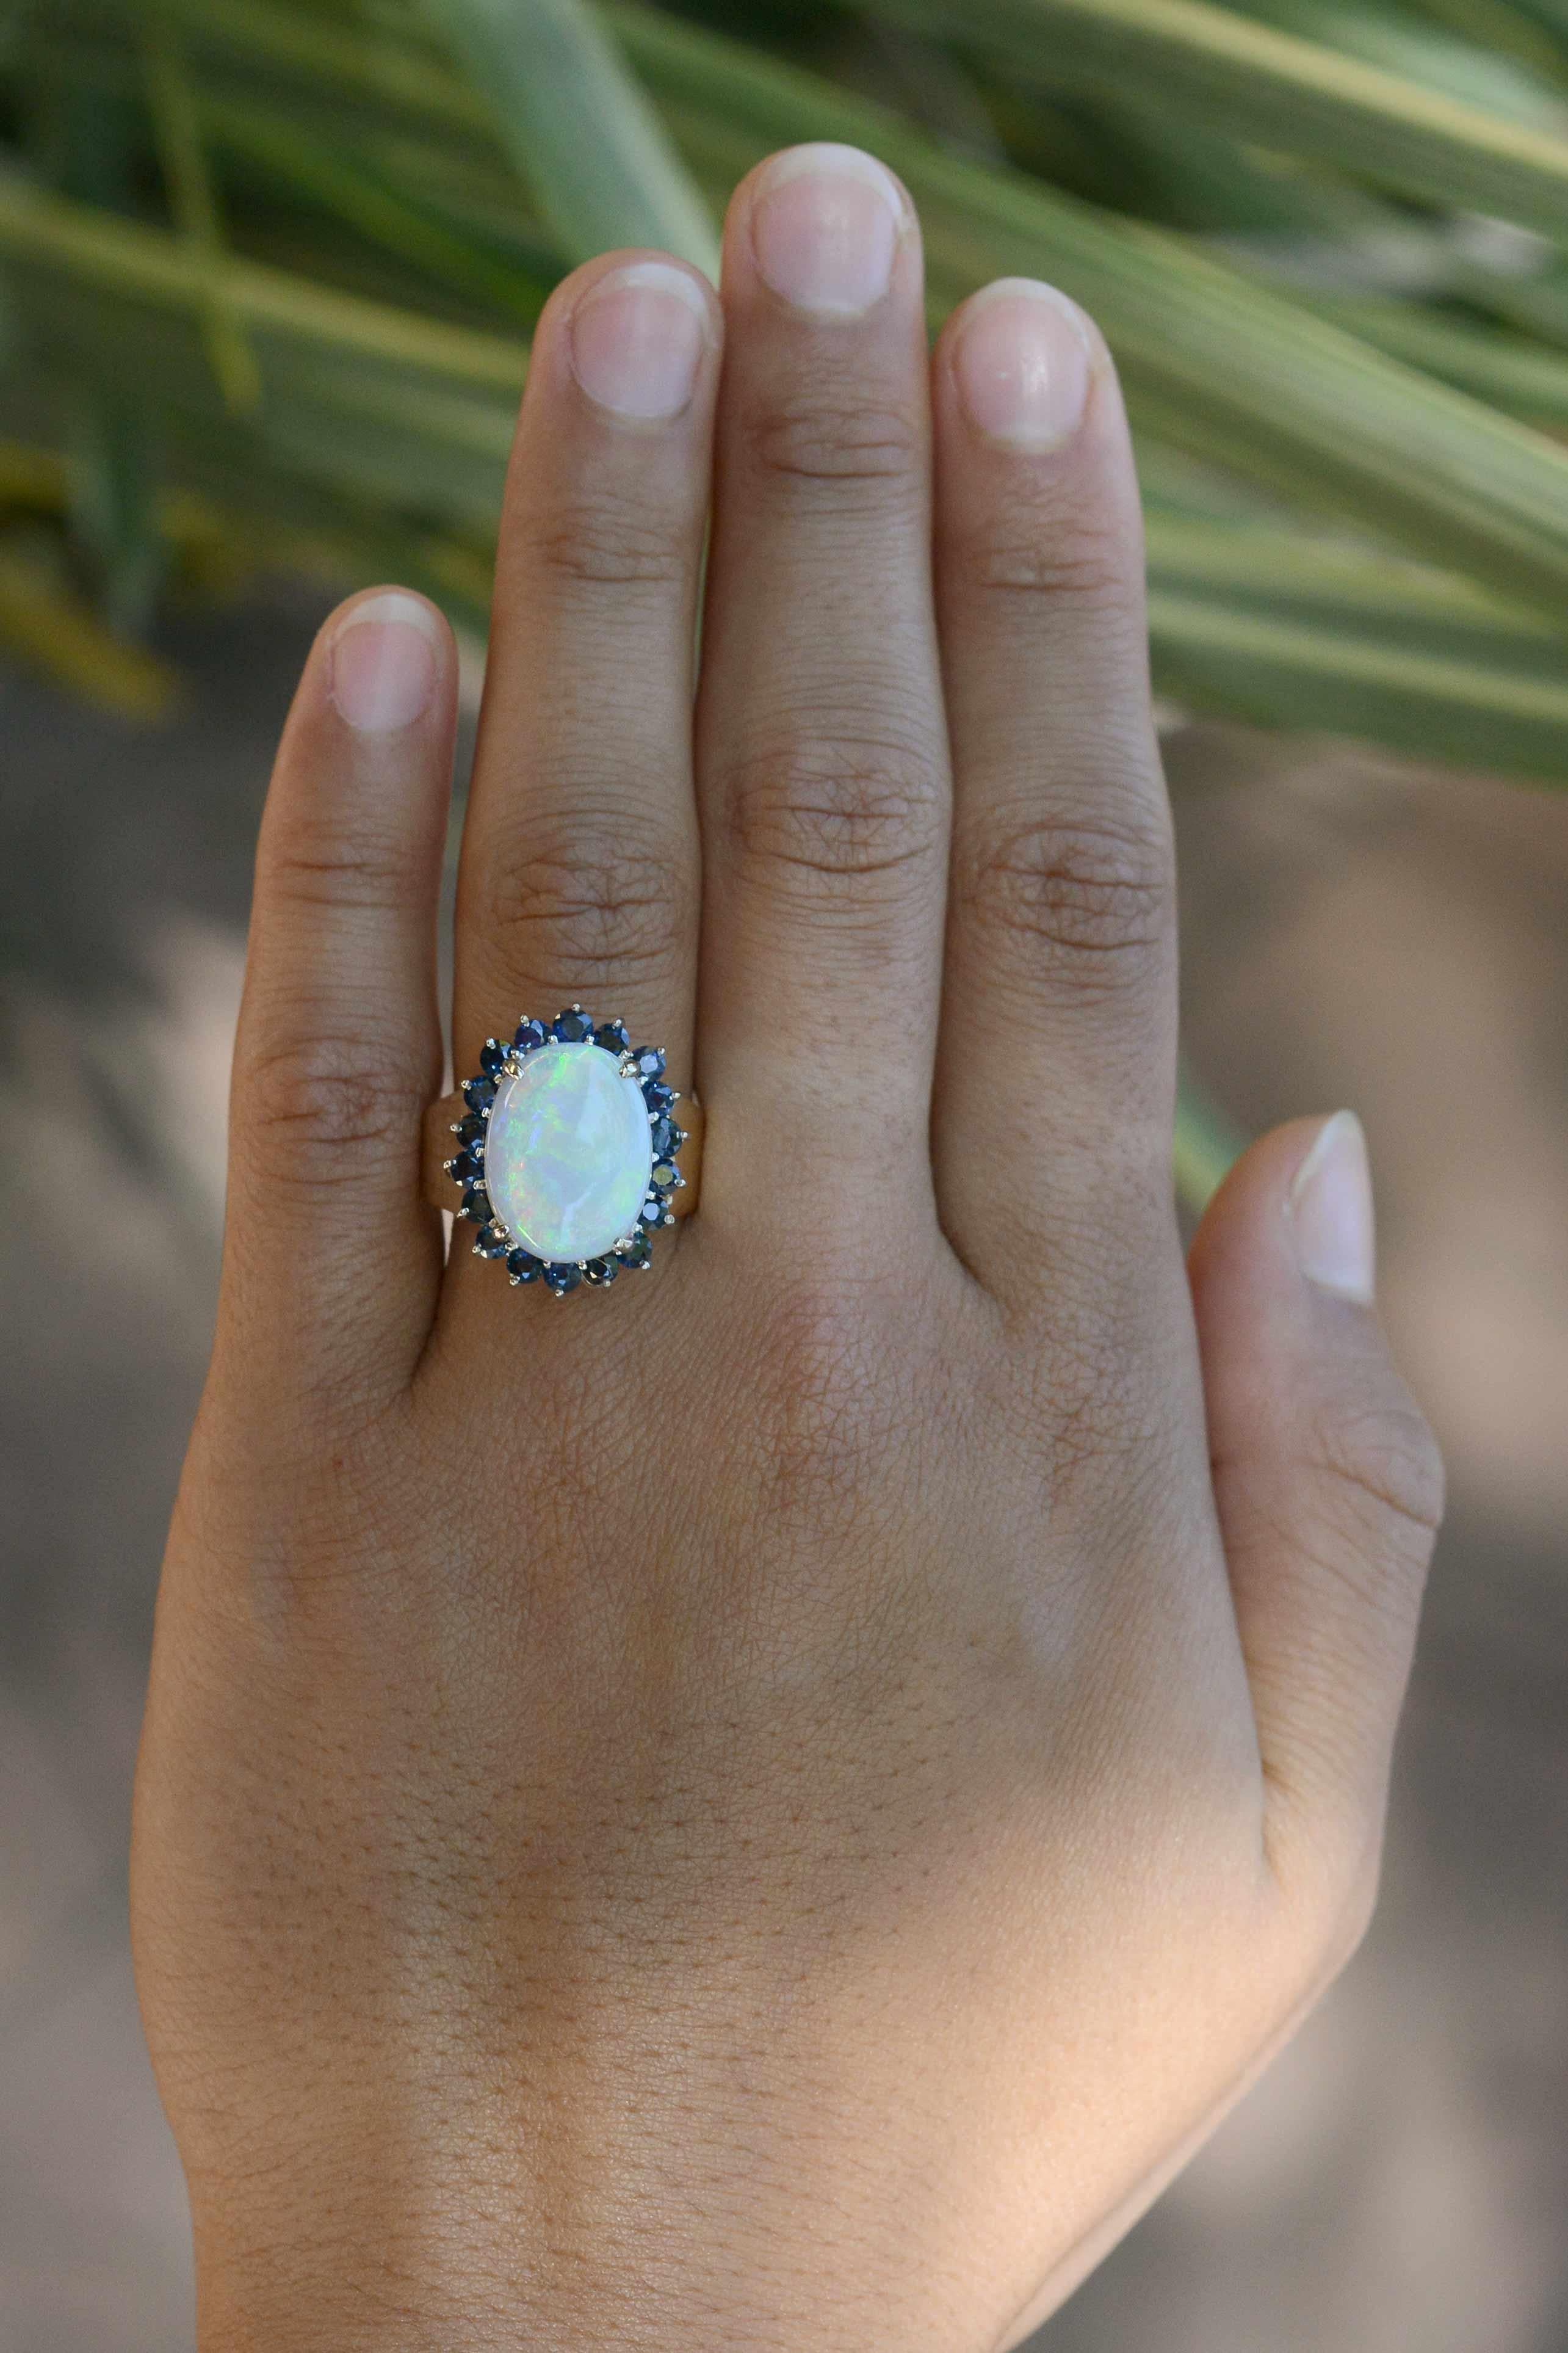 This ring is on hold for a customer.

A charismatic combination, this 5 carat Australian opal cocktail ring makes a bold statement. Featuring fiery flashes of blue-green, the gemstone smartly surrounded by velvety blue sapphires and supported by a